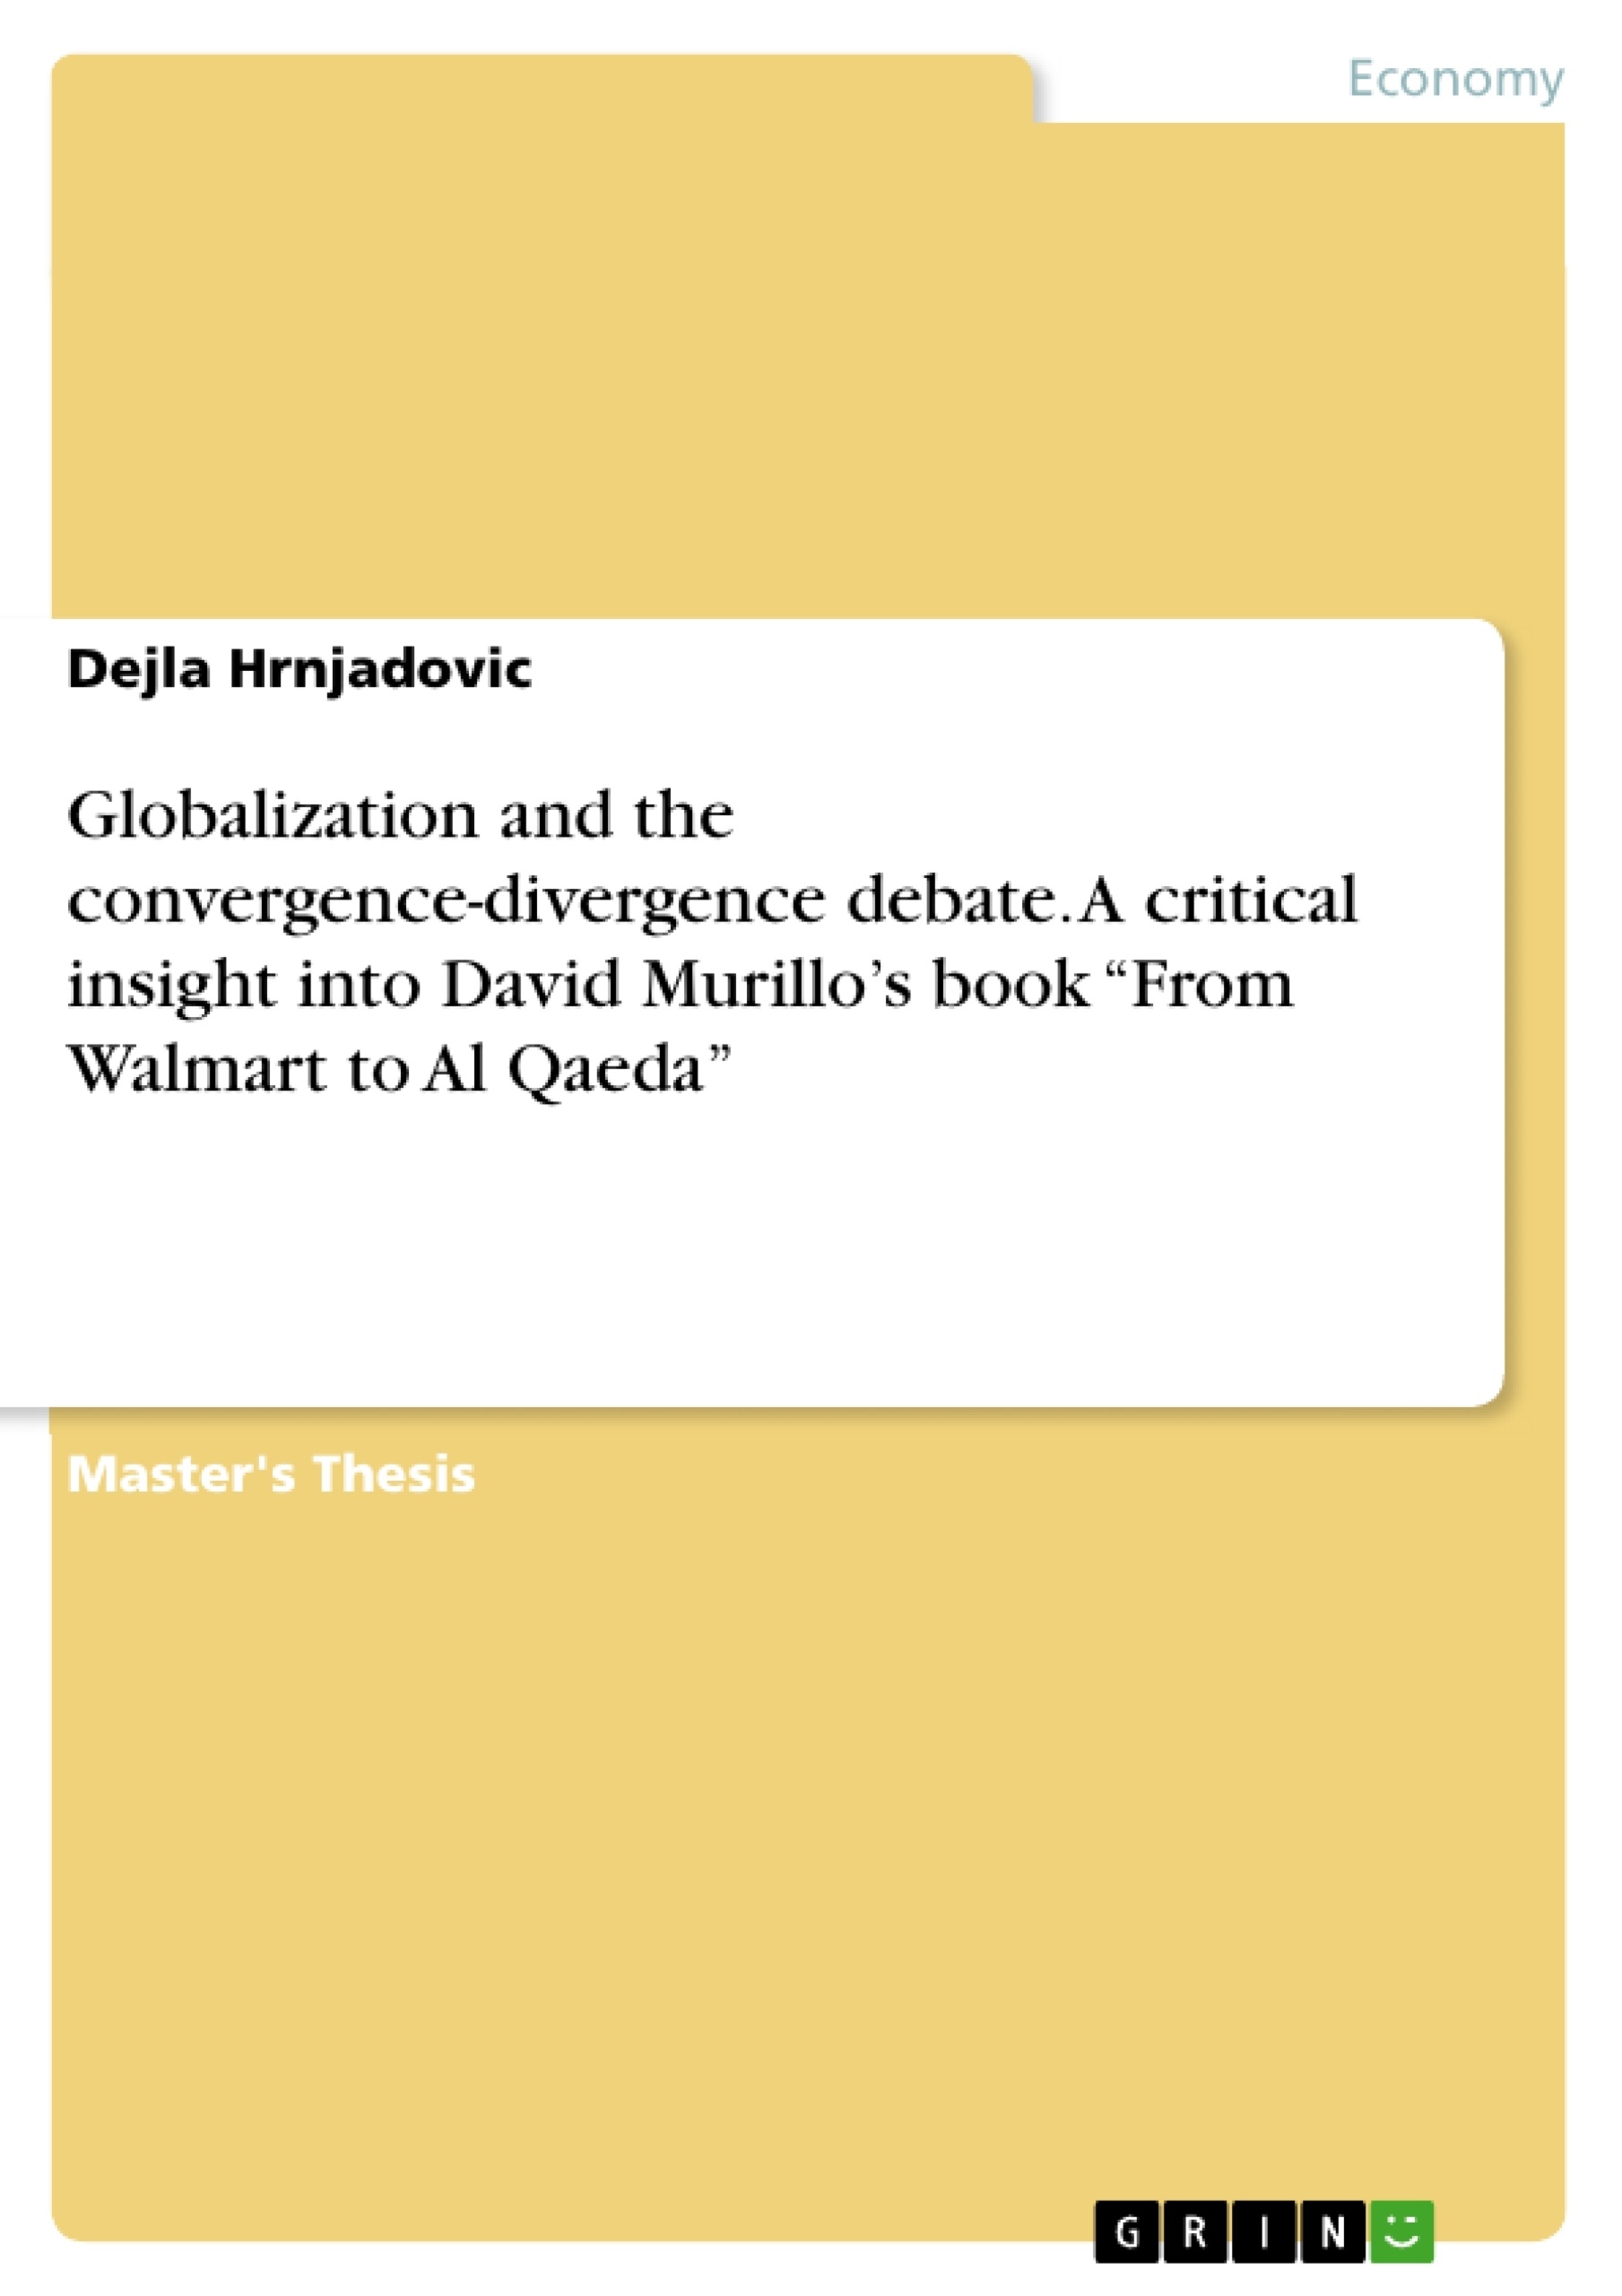 Título: Globalization and the convergence-divergence debate. A critical insight into David Murillo’s book “From Walmart to Al Qaeda”